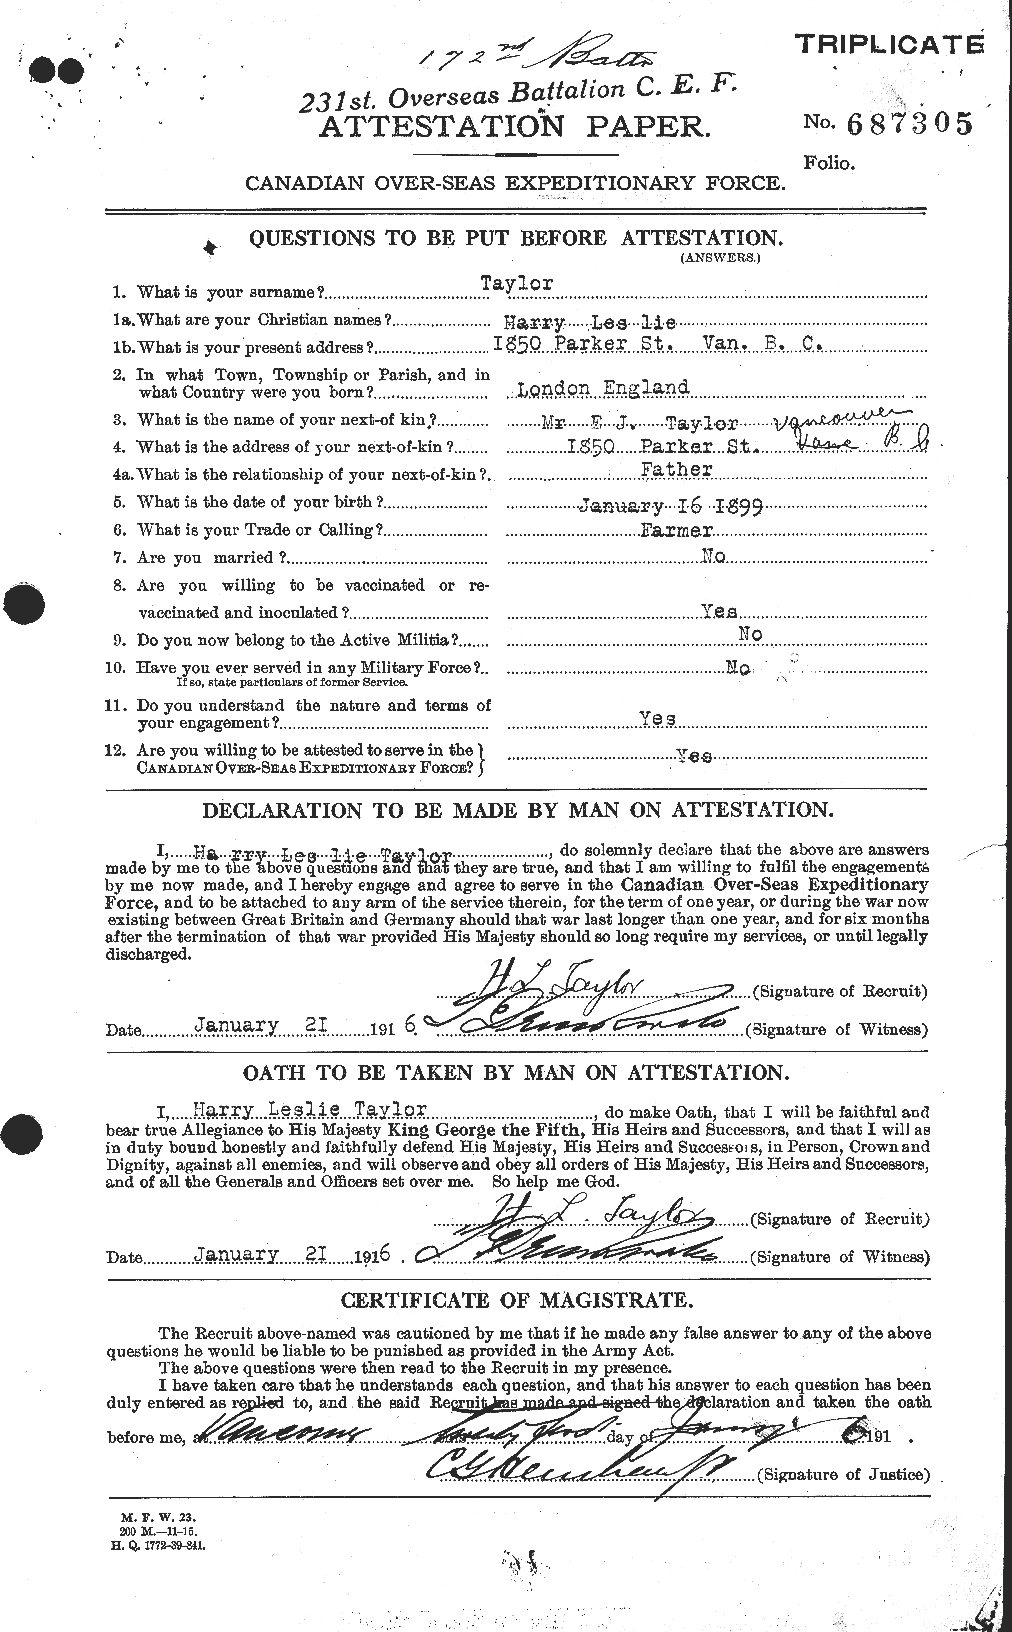 Personnel Records of the First World War - CEF 626499a